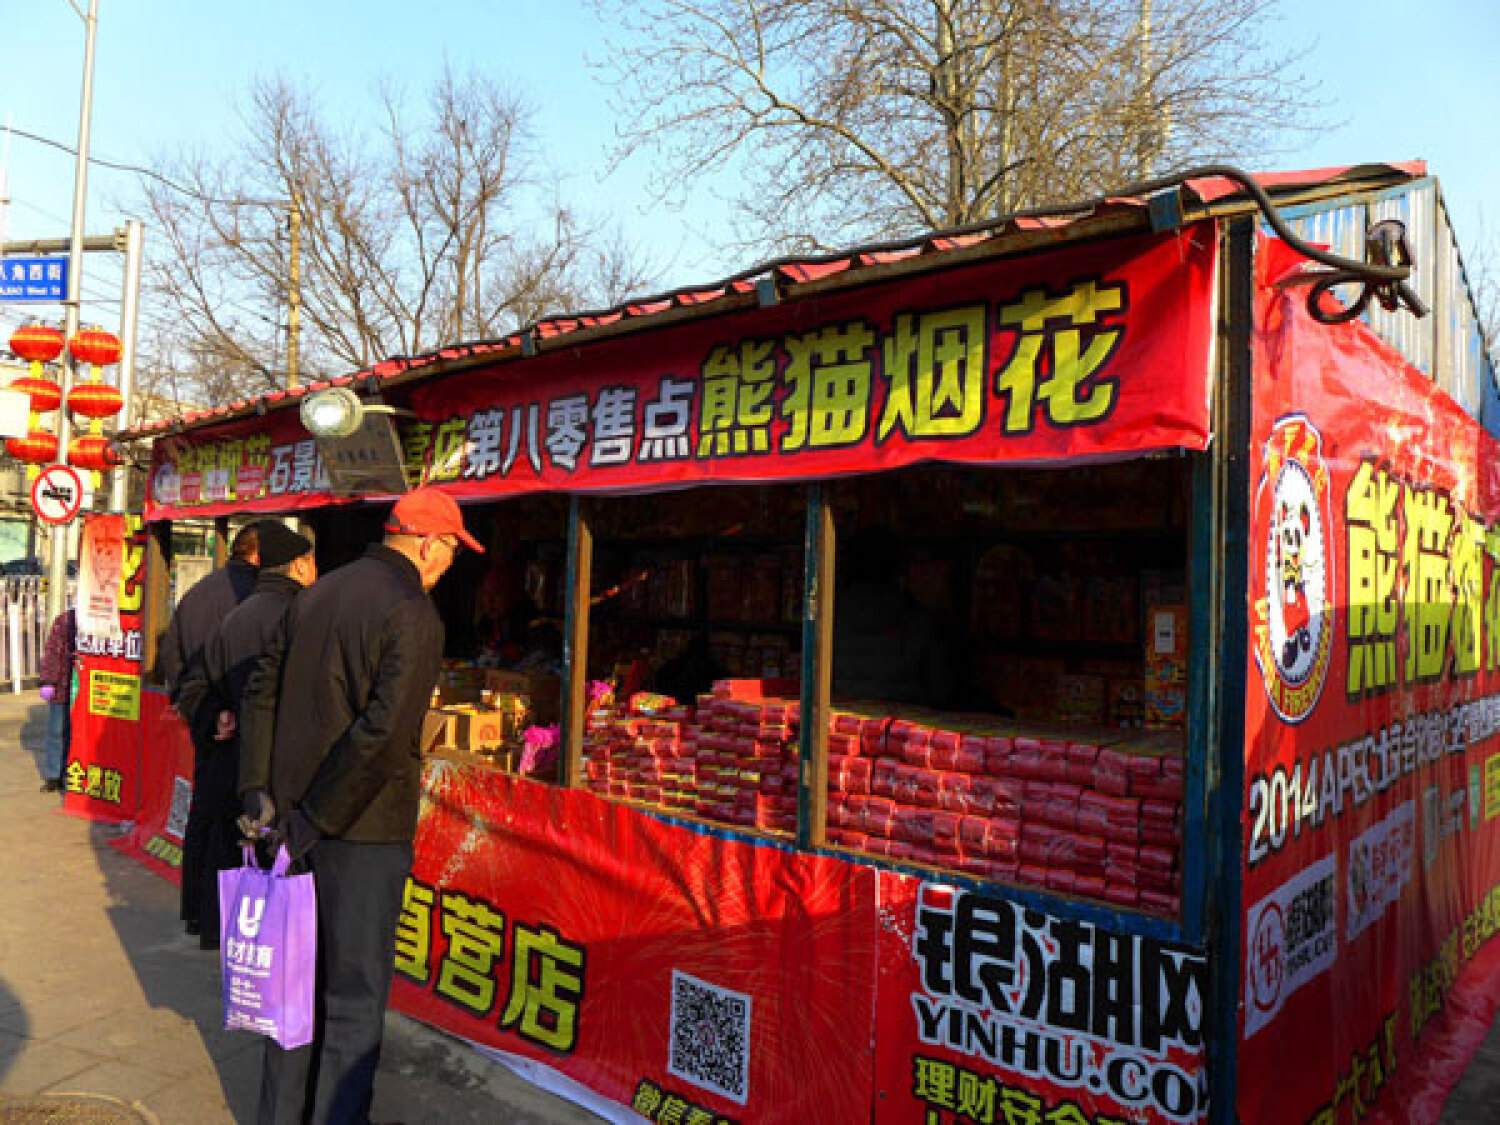 No Longer a Blast: With New Ban, Beijing Closes the Door on All CNY Fireworks